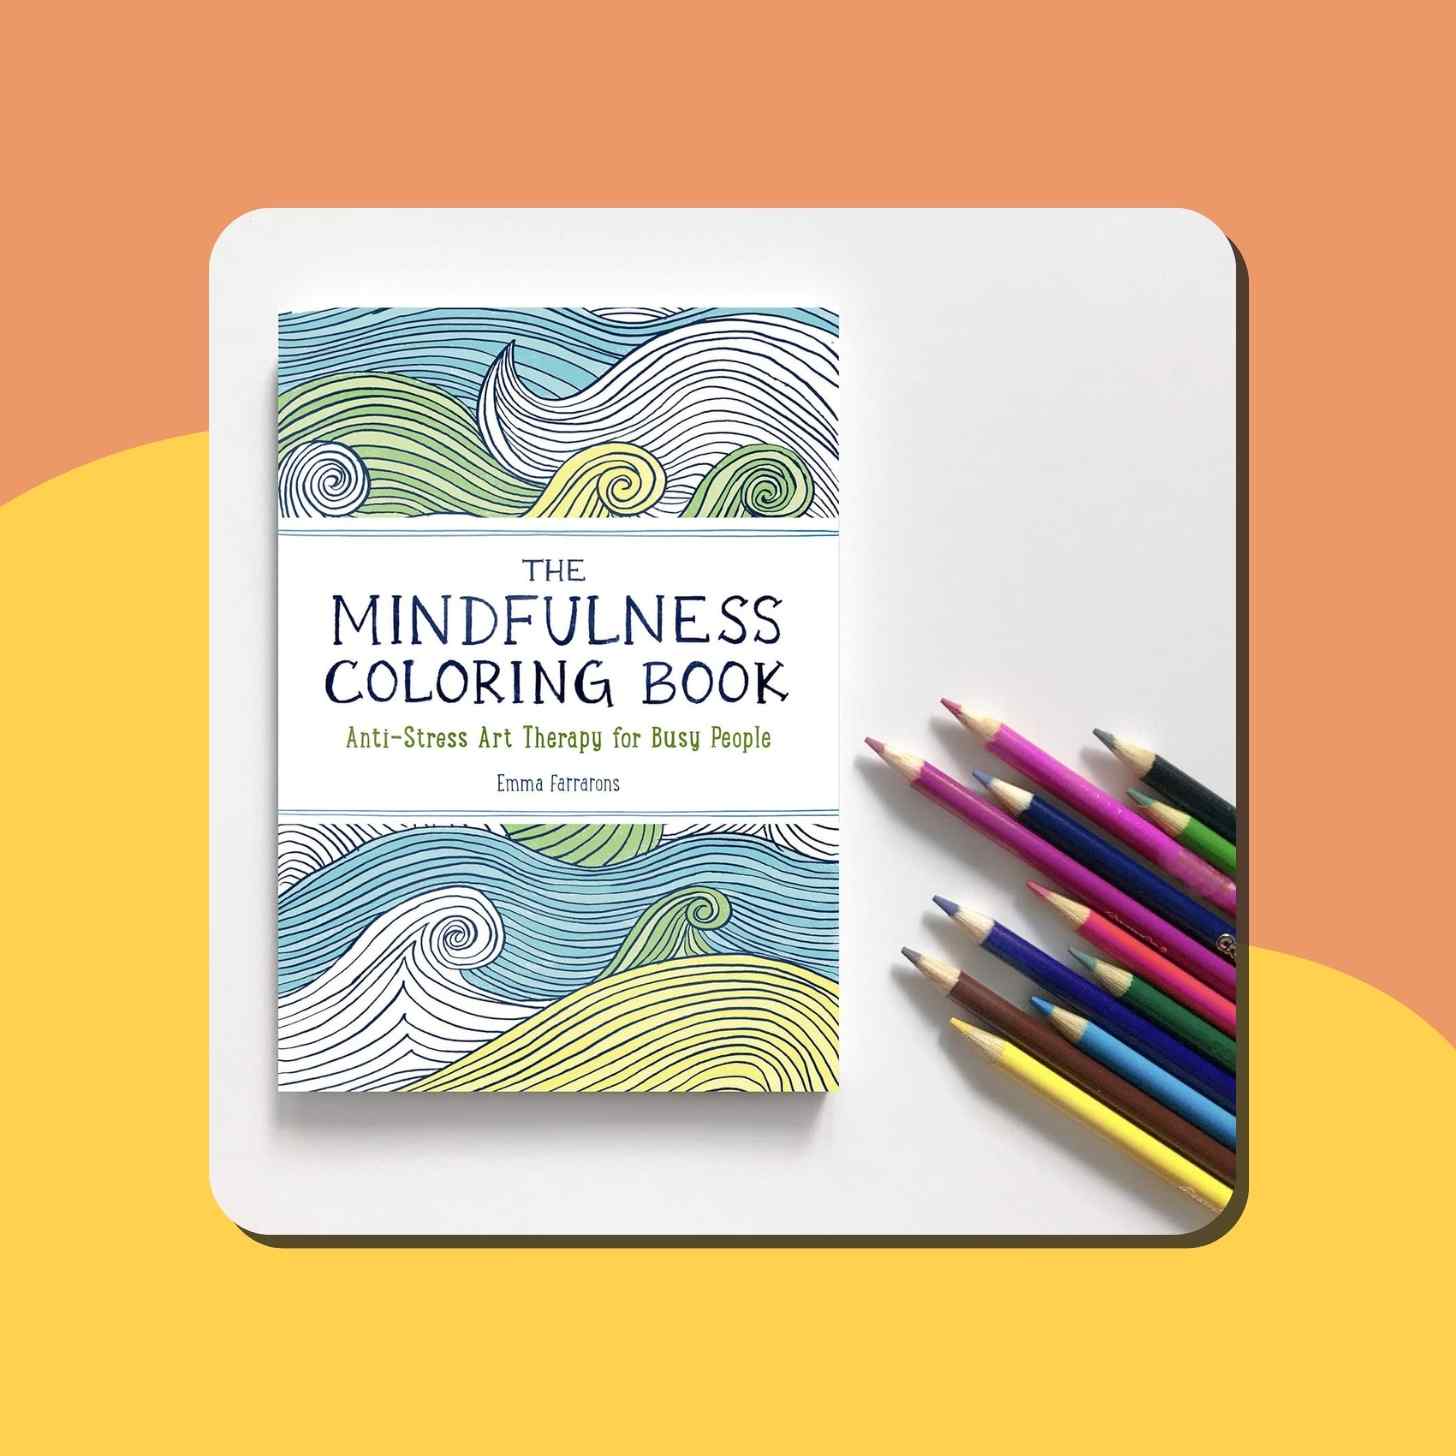 Emma Farrarons' Book Titled: "The Mindfulness Coloring Book", The Anti-Stress Art Therapy For Busy People